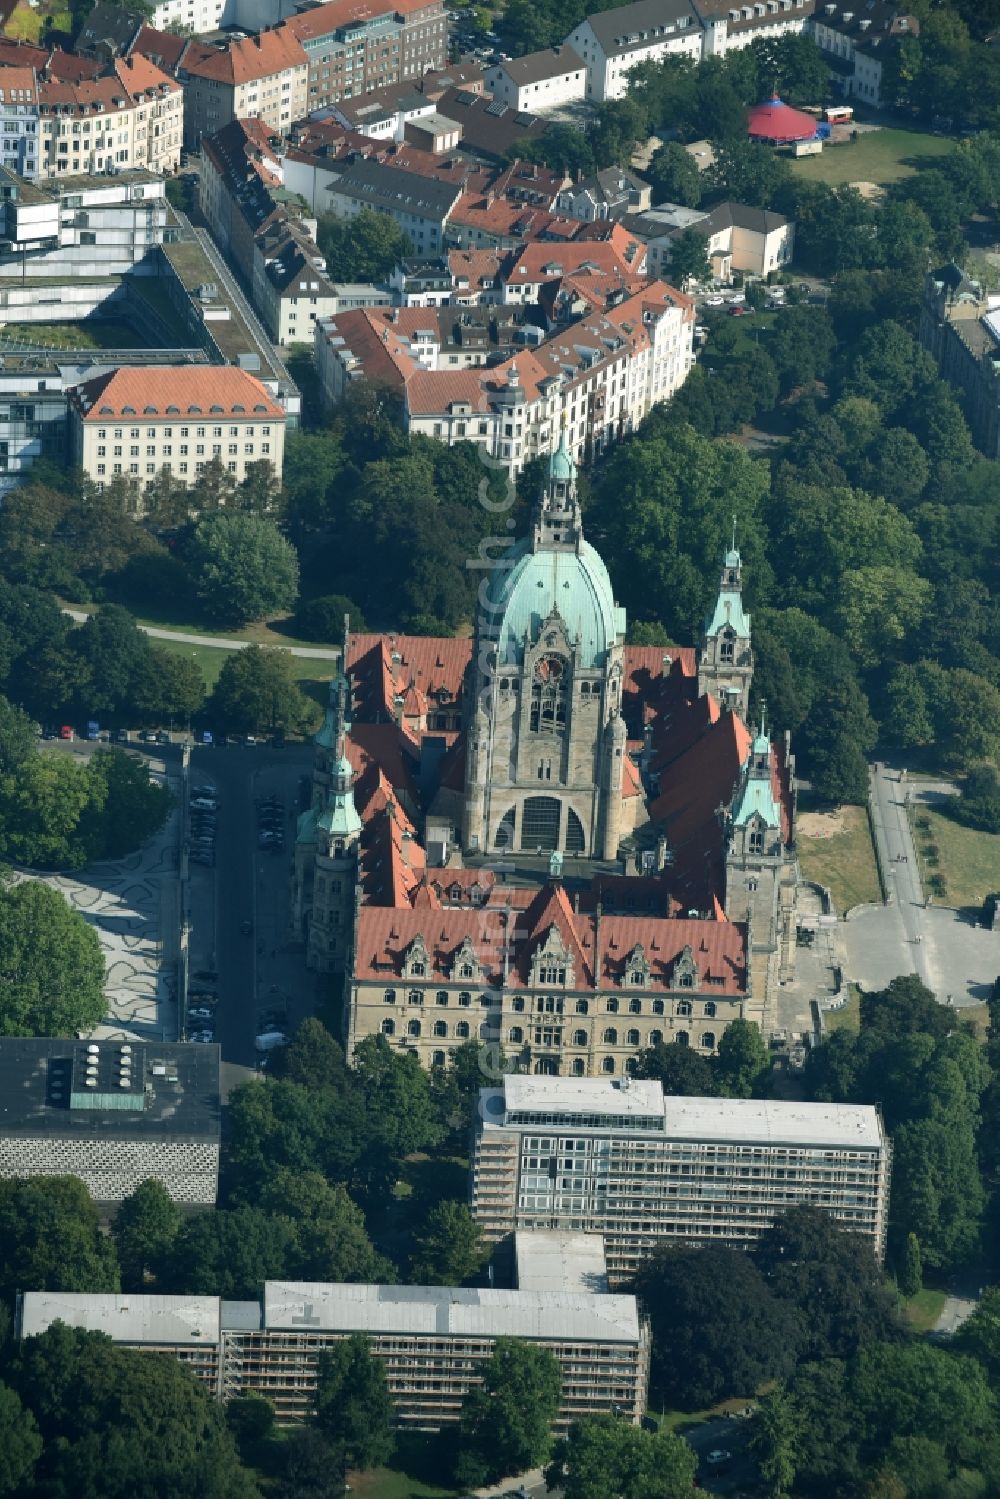 Hannover from above - City hall and administration building Neues Rathaus on Trammplatz square in Hannover in the state of Lower Saxony. The building is located on the pond Maschteich in the historical city center